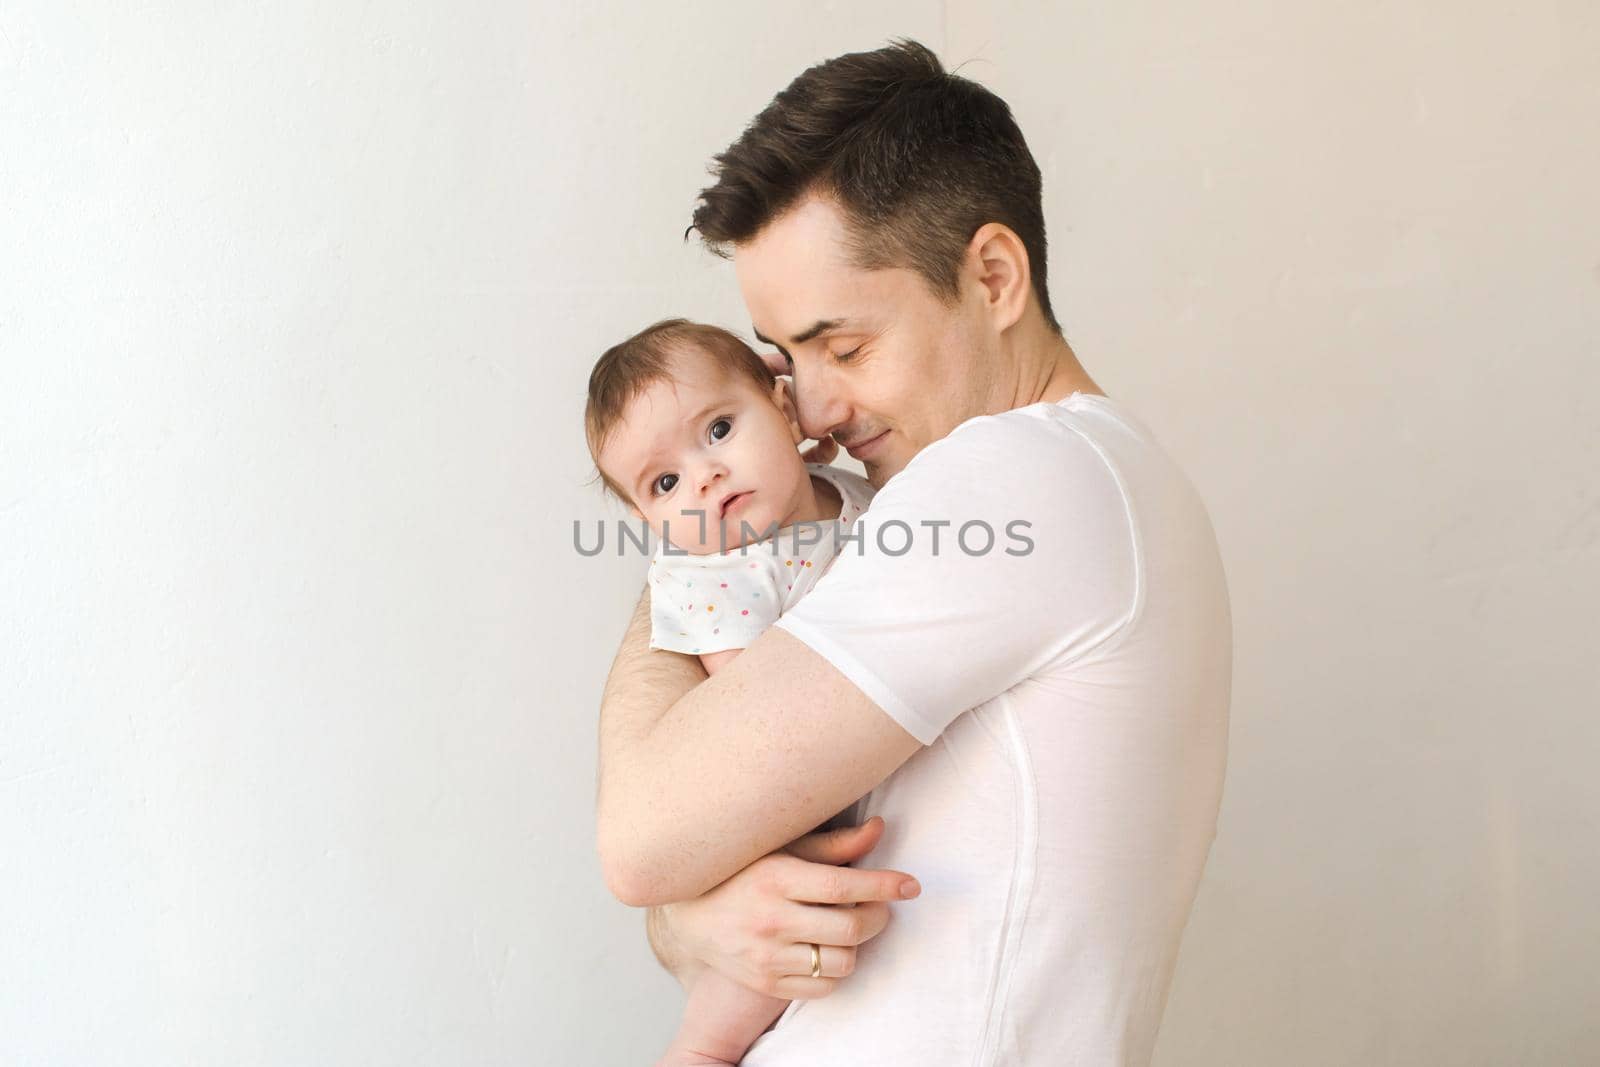 Side view of handsome young man embracing sweet baby and keeping eyes closed while standing on white background